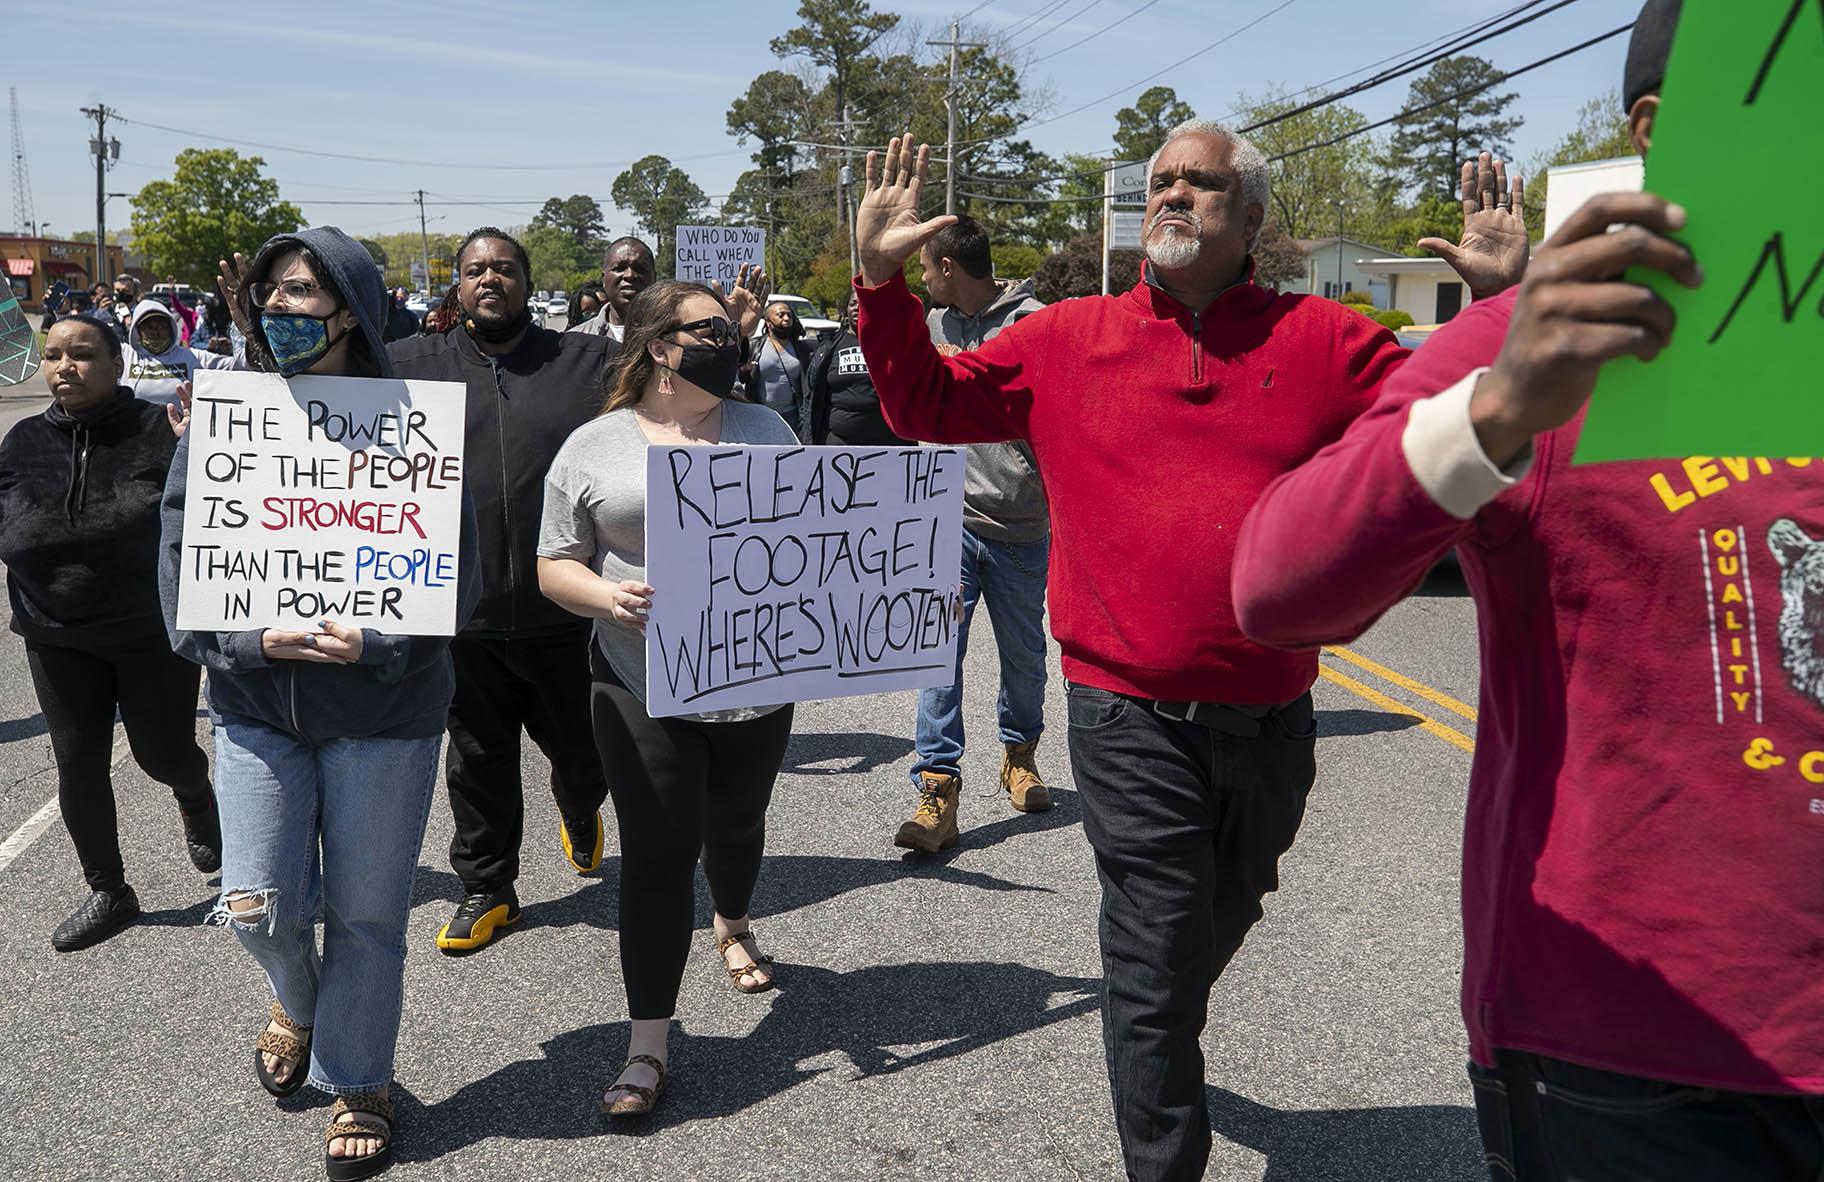 Kirk Rivers leads a group of demonstrators as they block Ehringhaus Street, a main retail avenue in Elizabeth City, N.C., Friday, April 23, 2021, as they demand after a fatal shooting that body camera video be released by the Pasquotank Sheriff’s office. (Robert Willett / The News & Observer via AP)